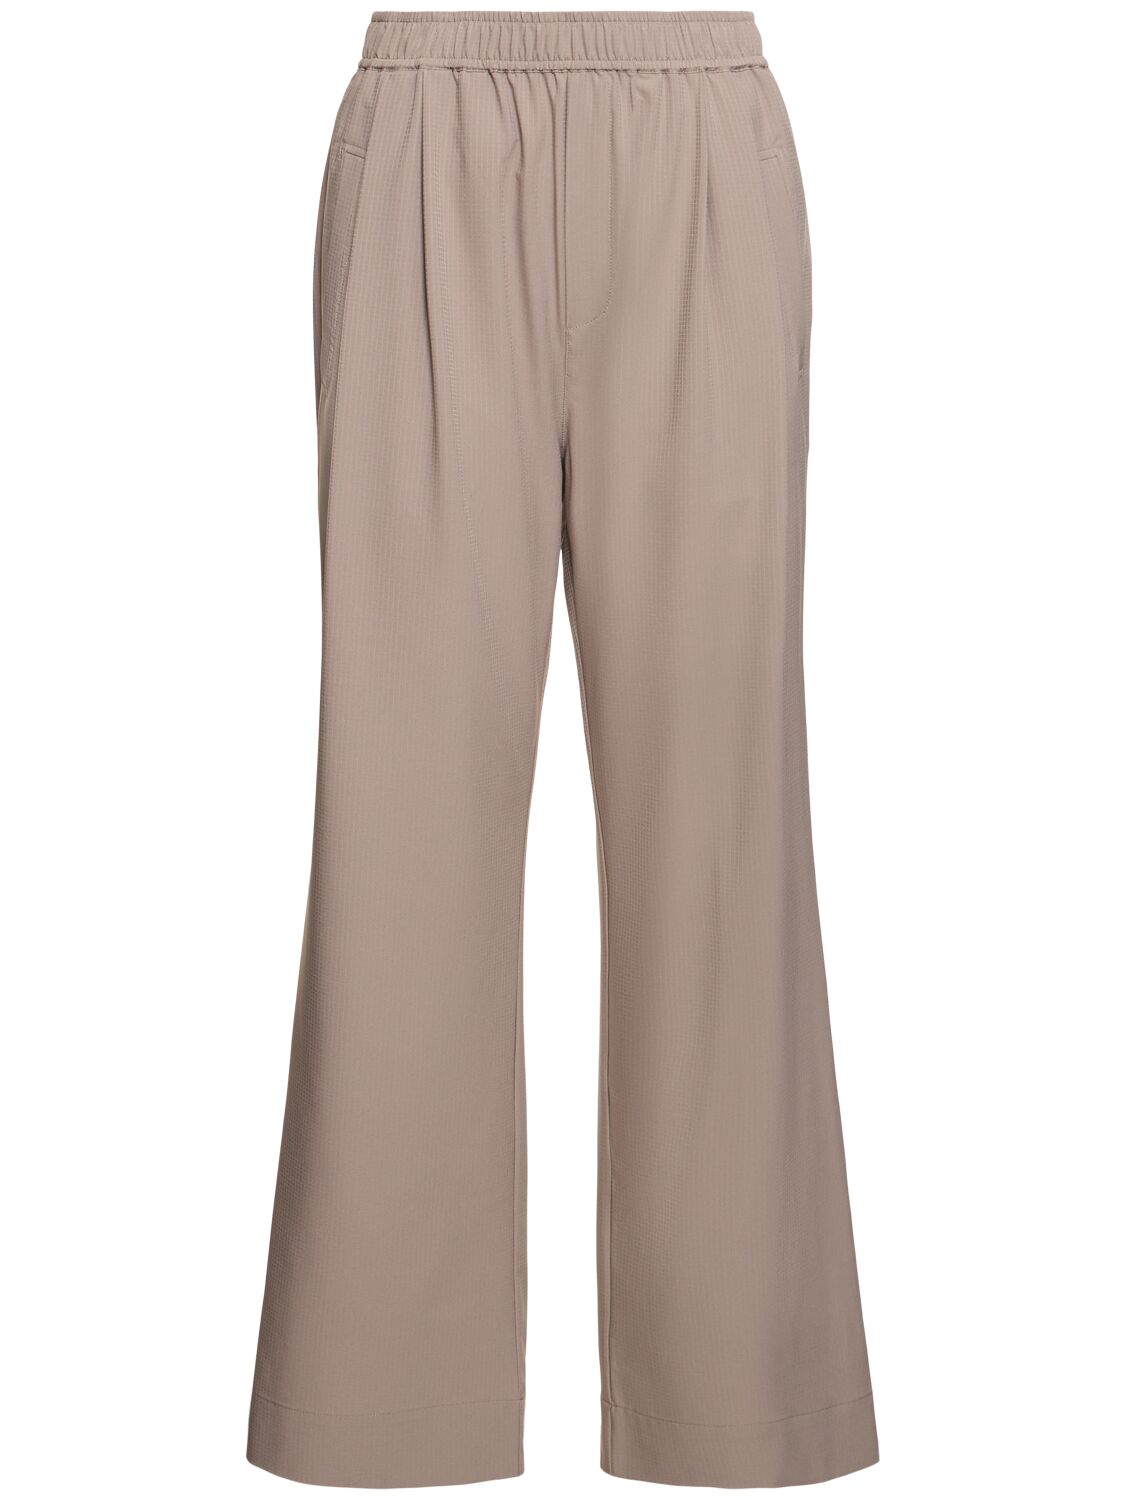 Varley Tacome Pleated Straight Pants In Cinder